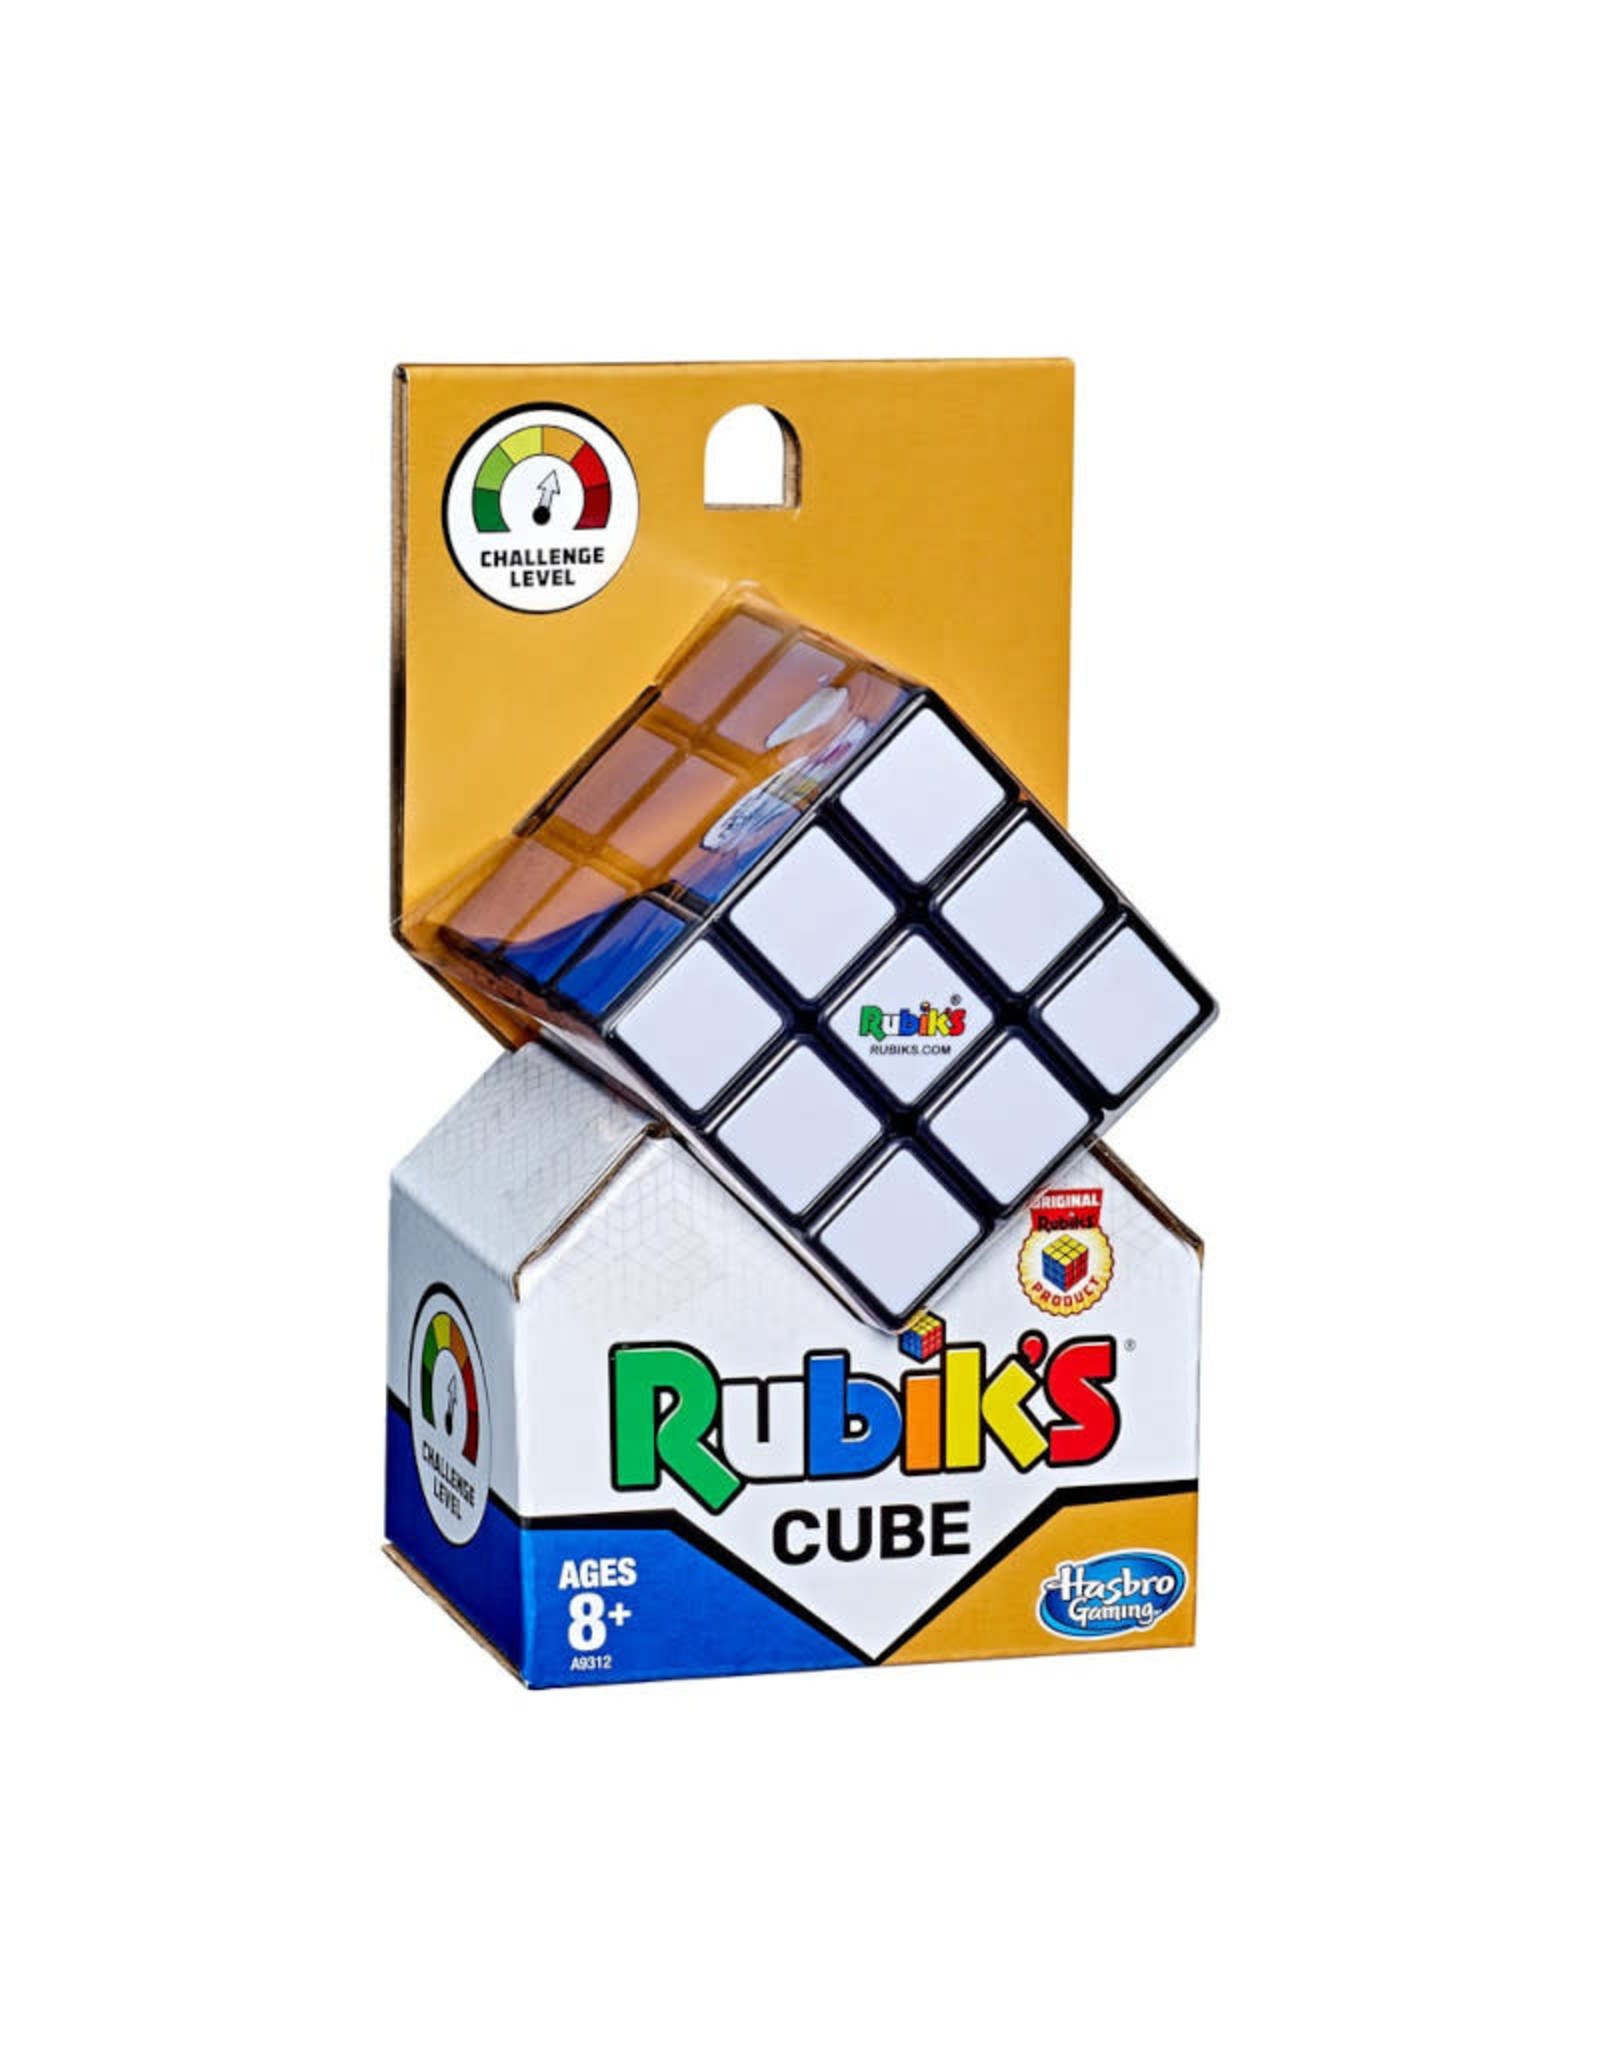 Puzzle Game Standard Packaging A9312 AOI NEW Hasbro Gaming Rubik's 3X3 Cube 